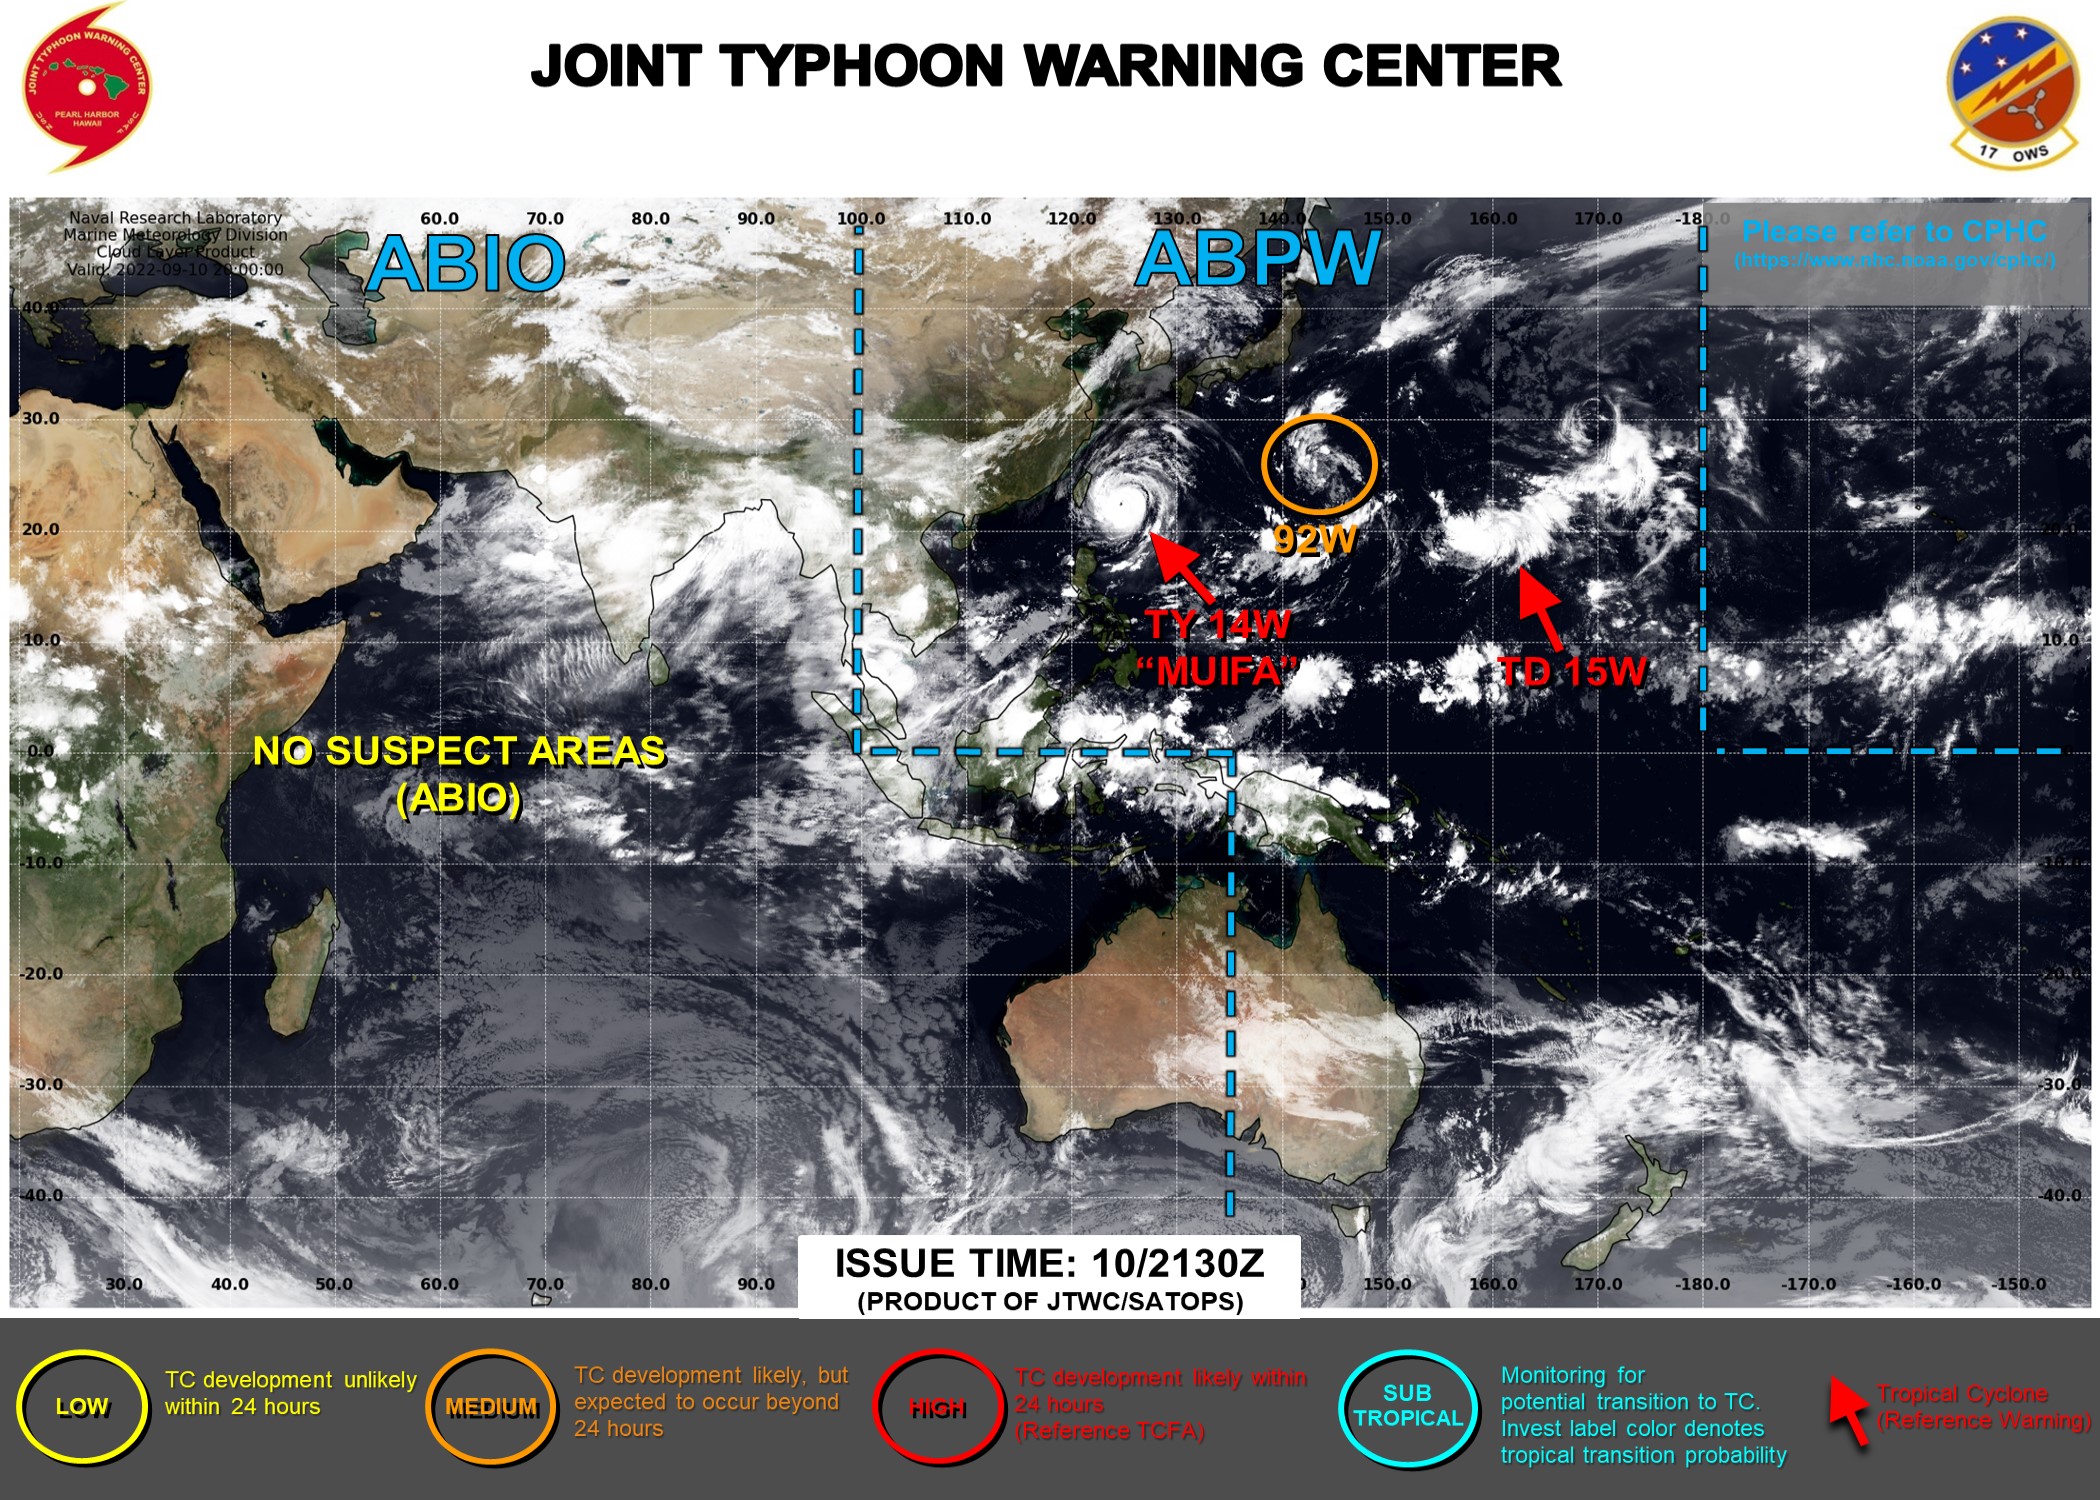 JTWC IS ISSUING 6HOURLY WARNINGS AND 3HOURLY SATELLITE BULLETINS ON 14W(MUIFA) AND 15W.